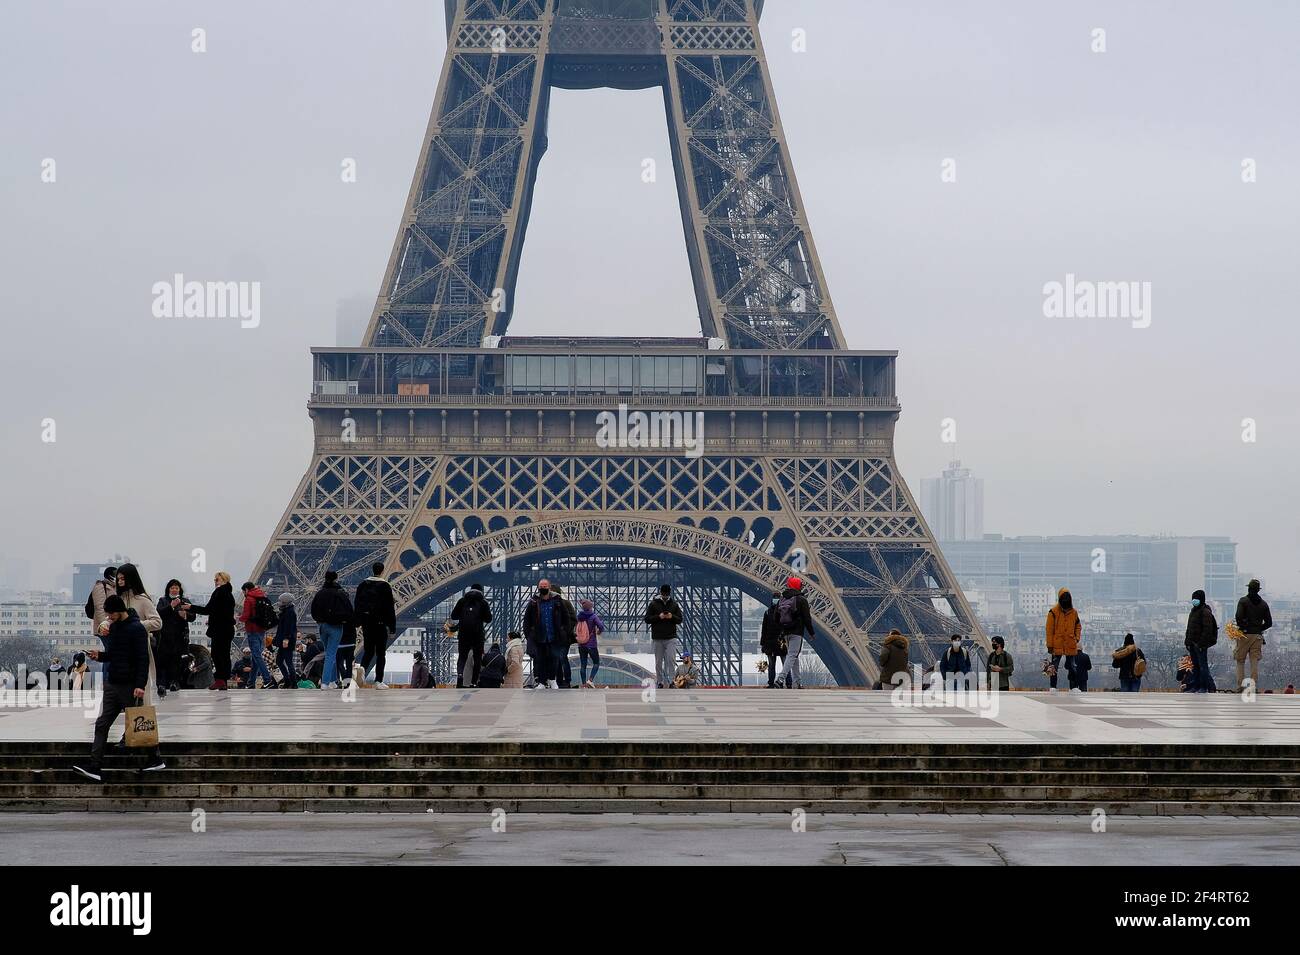 Paris, France - Janauary 31, 2021 : Tourists and parisians in front of the Eiffel Tower in Paris during covid restrictions. Stock Photo